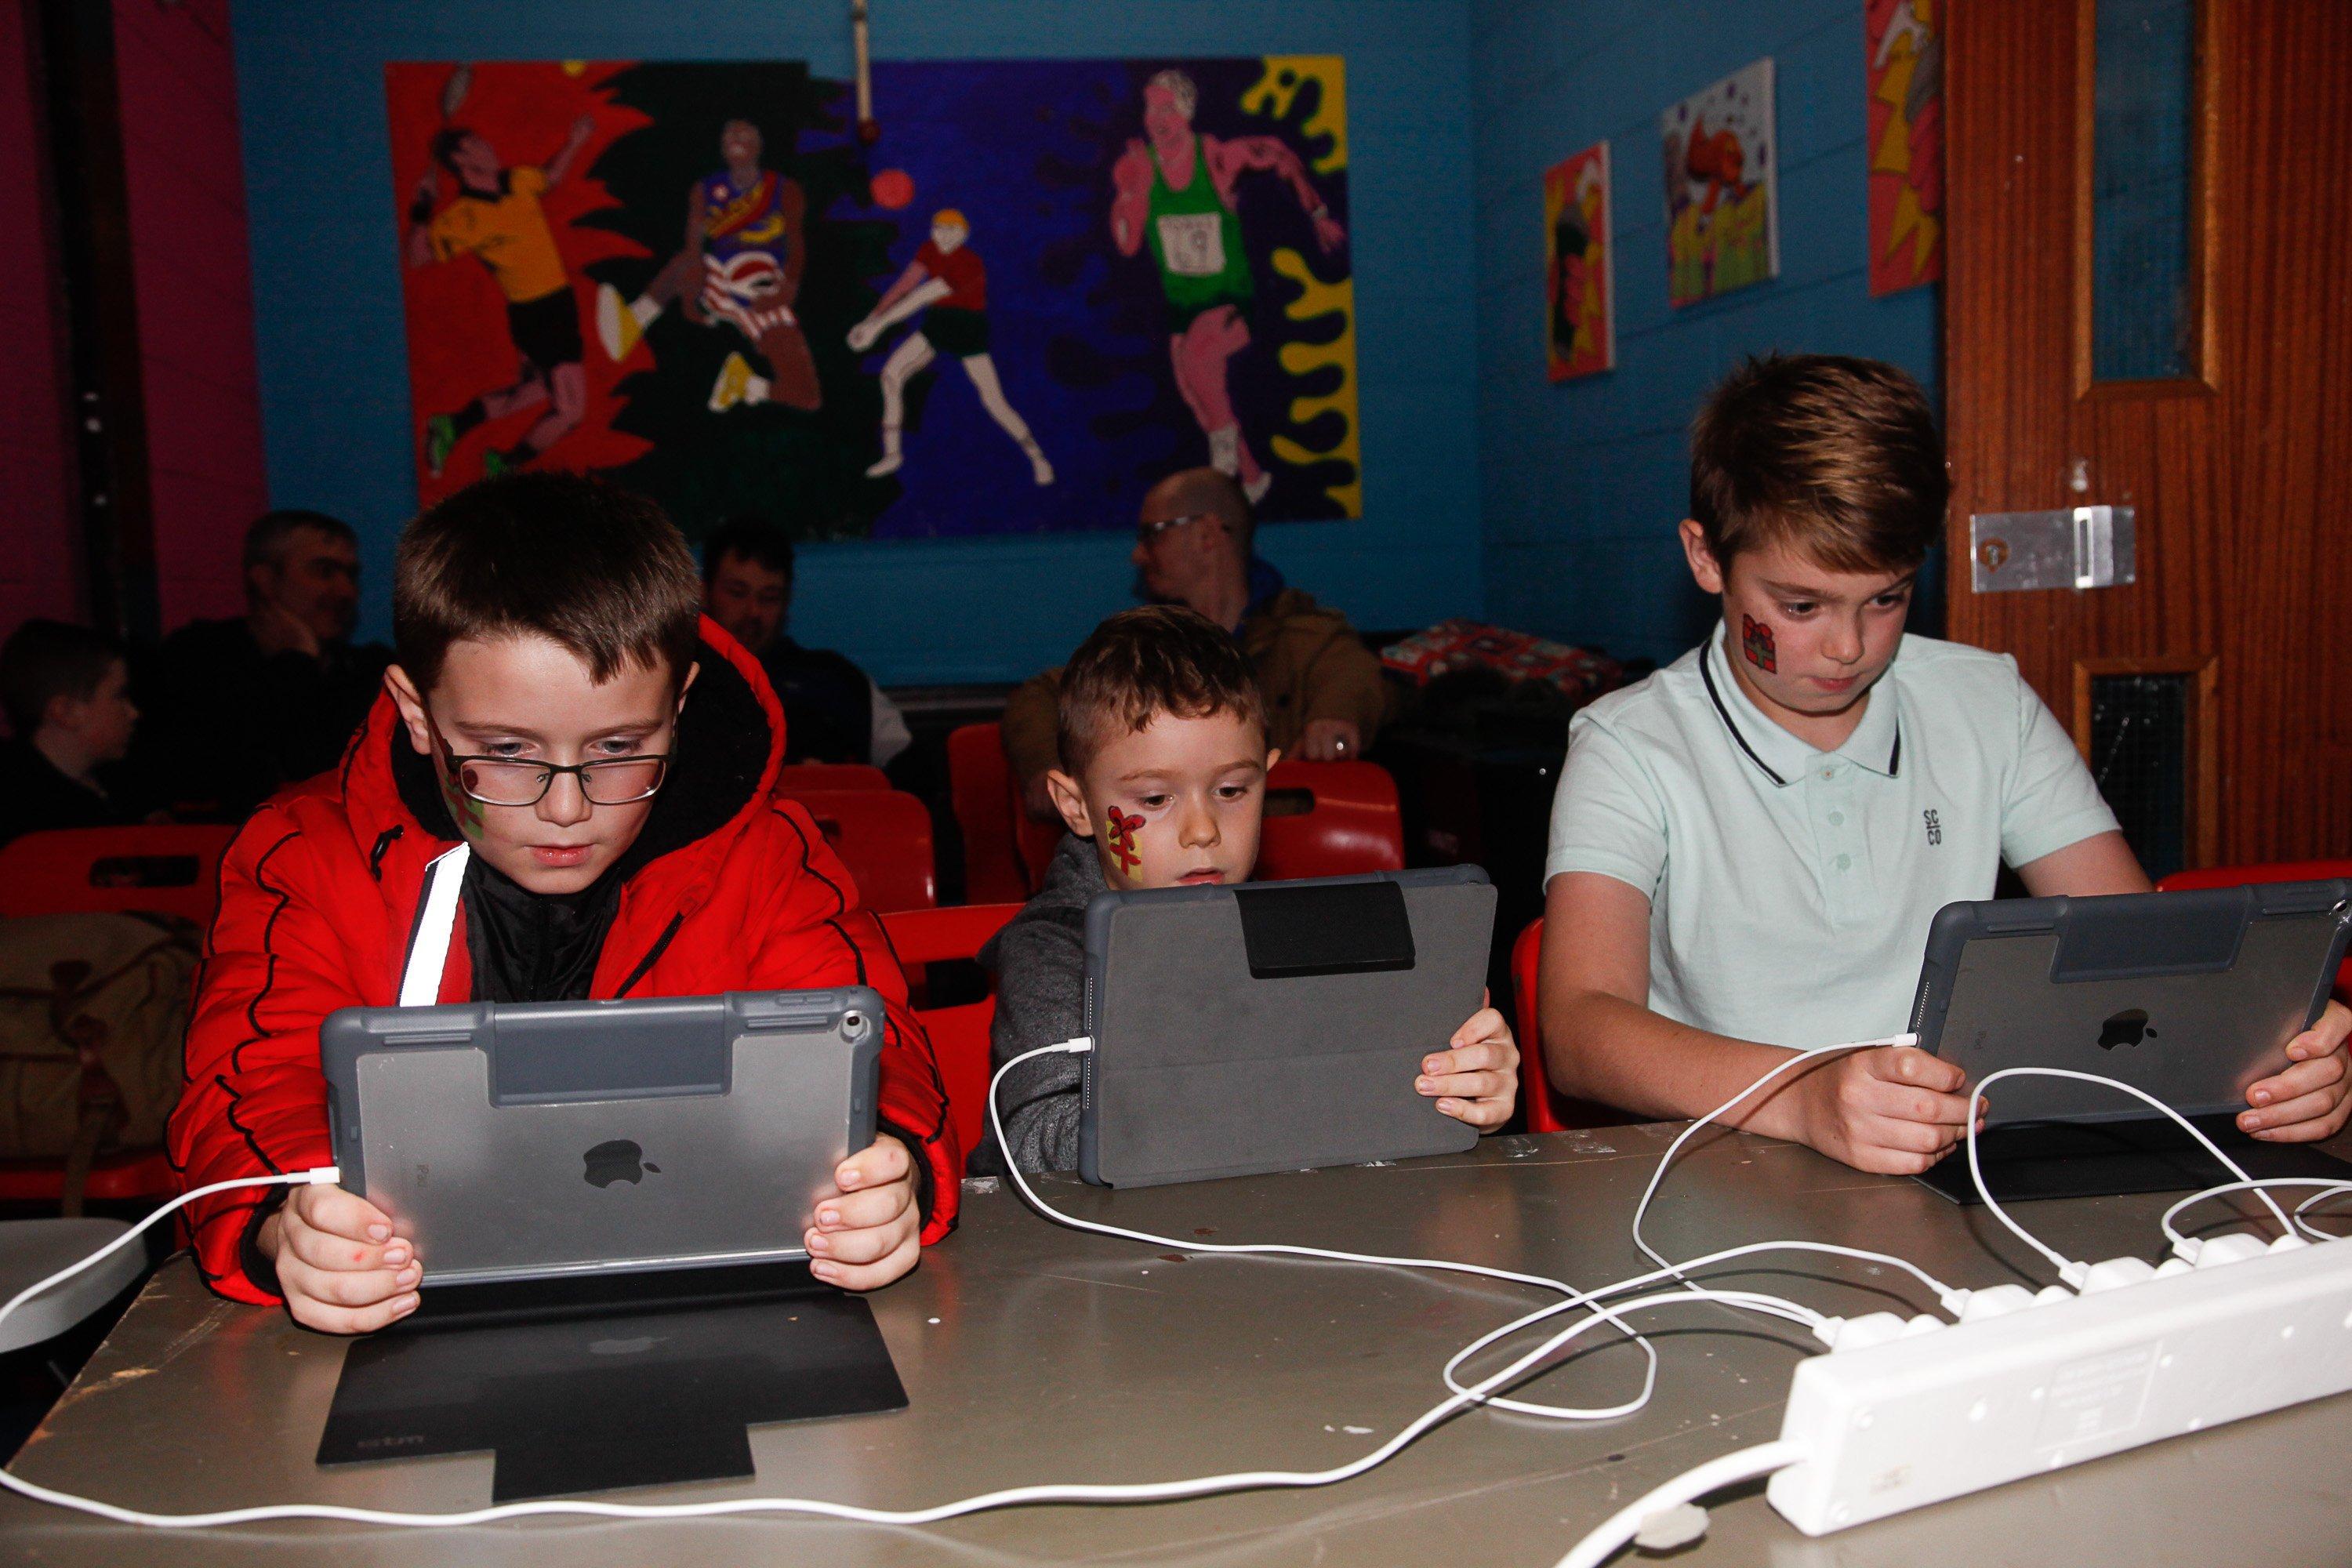 Camelon Winter Festival on Sunday, November 24. Fortnite kids totally immersed in the gaming zone. Picture by Scott Louden.